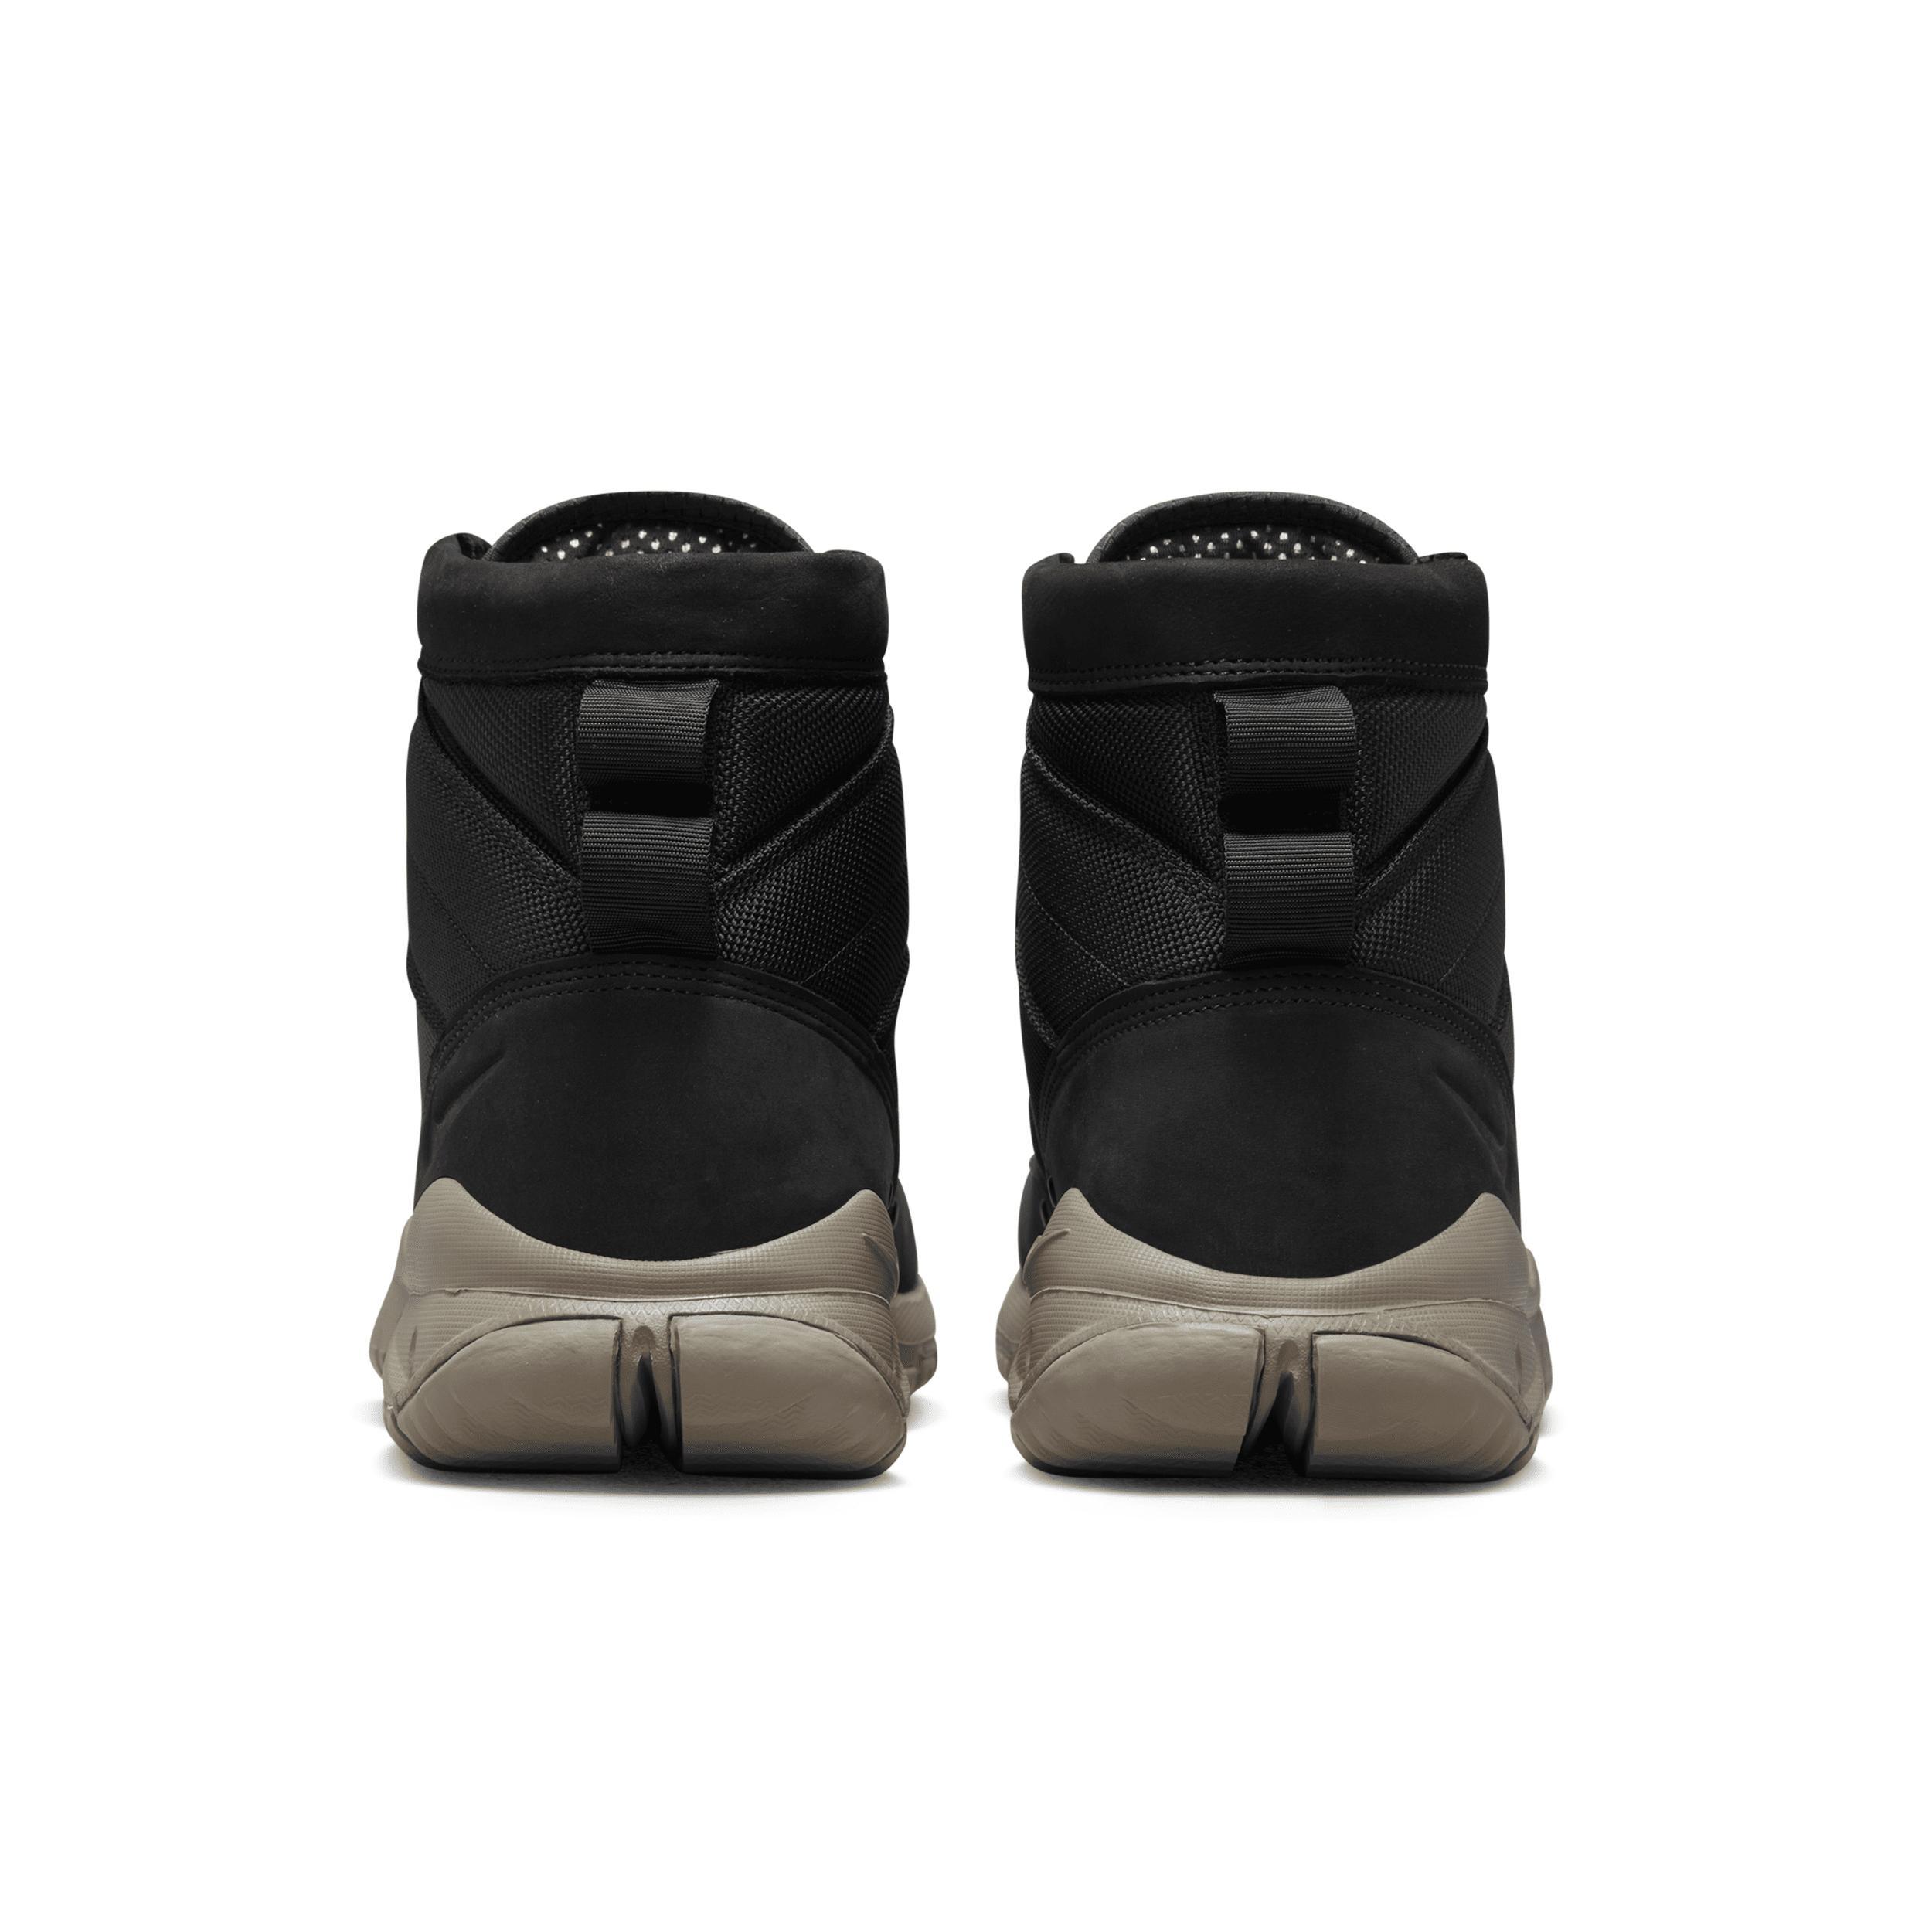 Nike Men's SFB 6" Leather Boots Product Image